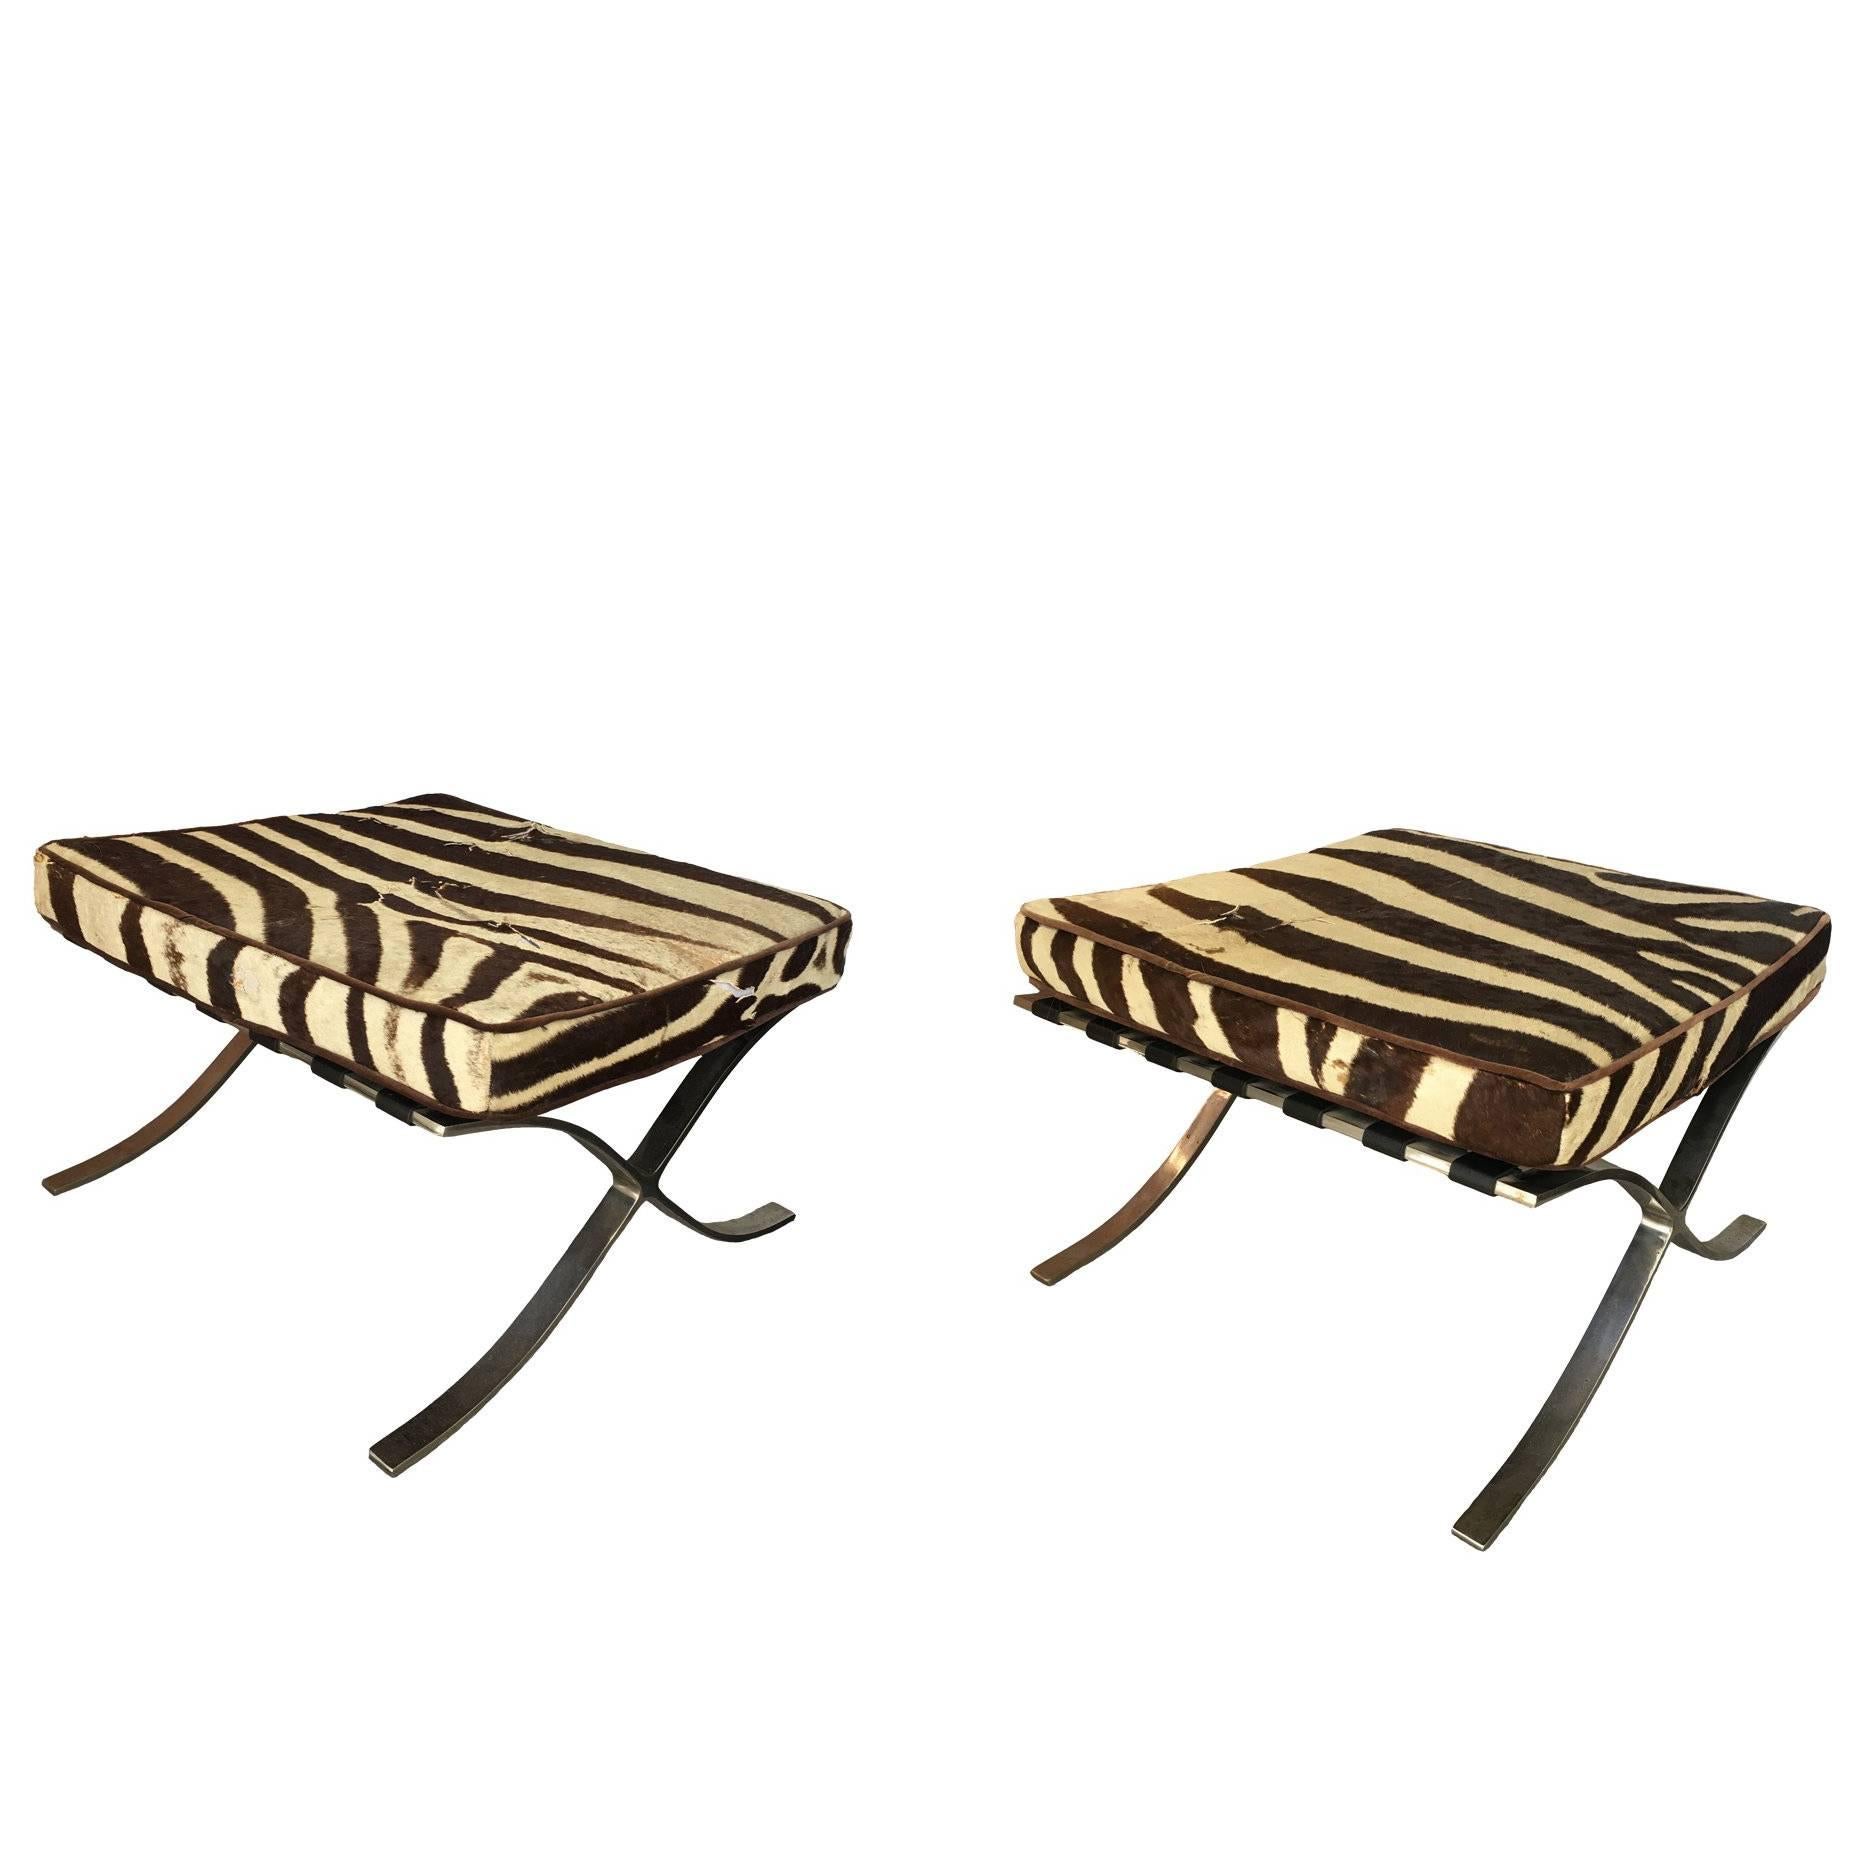 Pair of Barcelona Stools with Zebra Hide Cushions